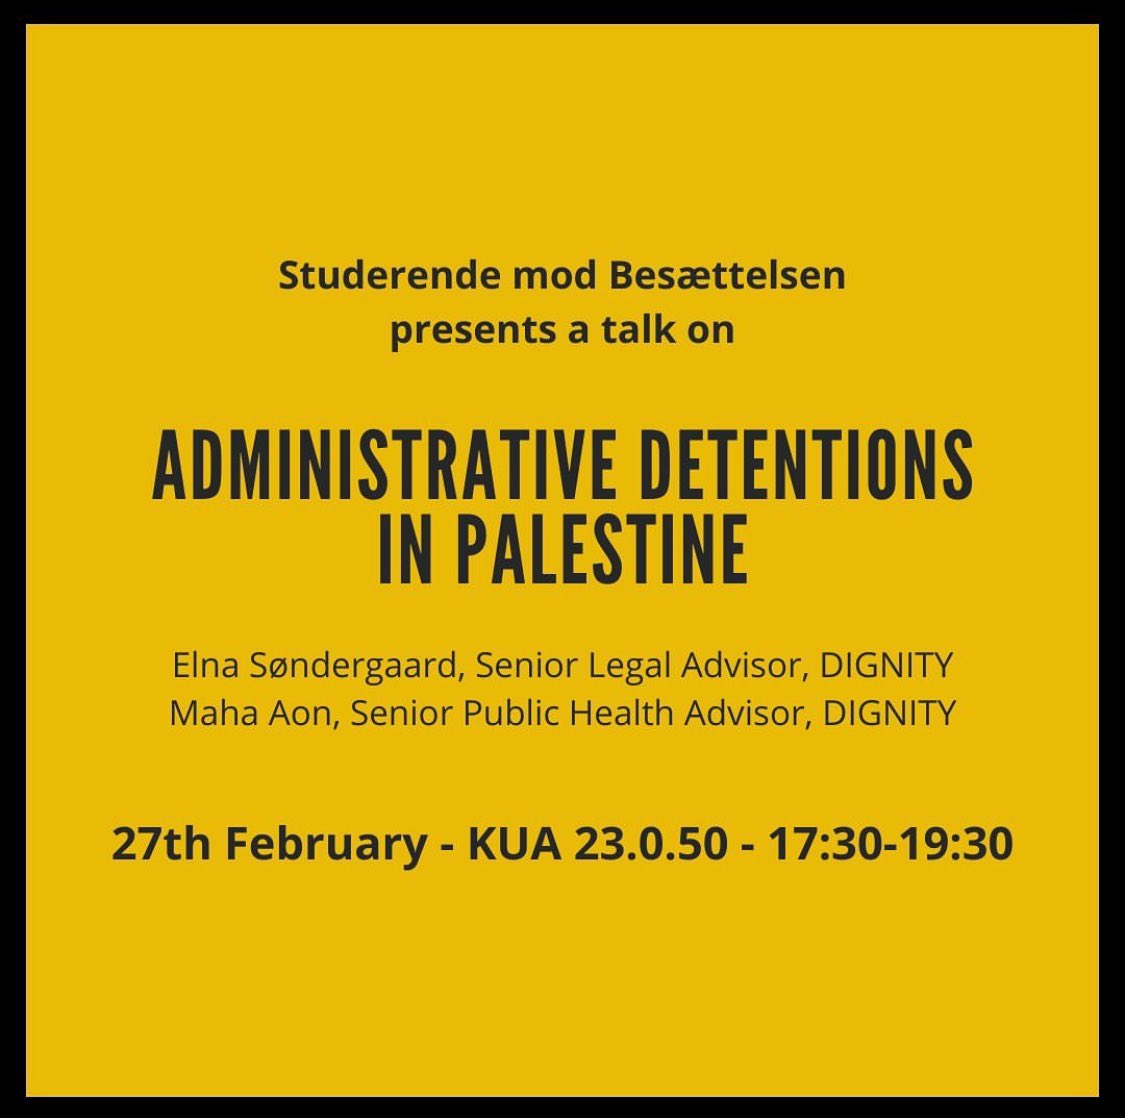 Join me & @es_elna for a discussion on the conditions of arrest & detention of Palestinians by Israel hosted by Students against the Occupation at Copenhagen University @koebenhavns_uni. ⁦@DIGNITY_INT⁩